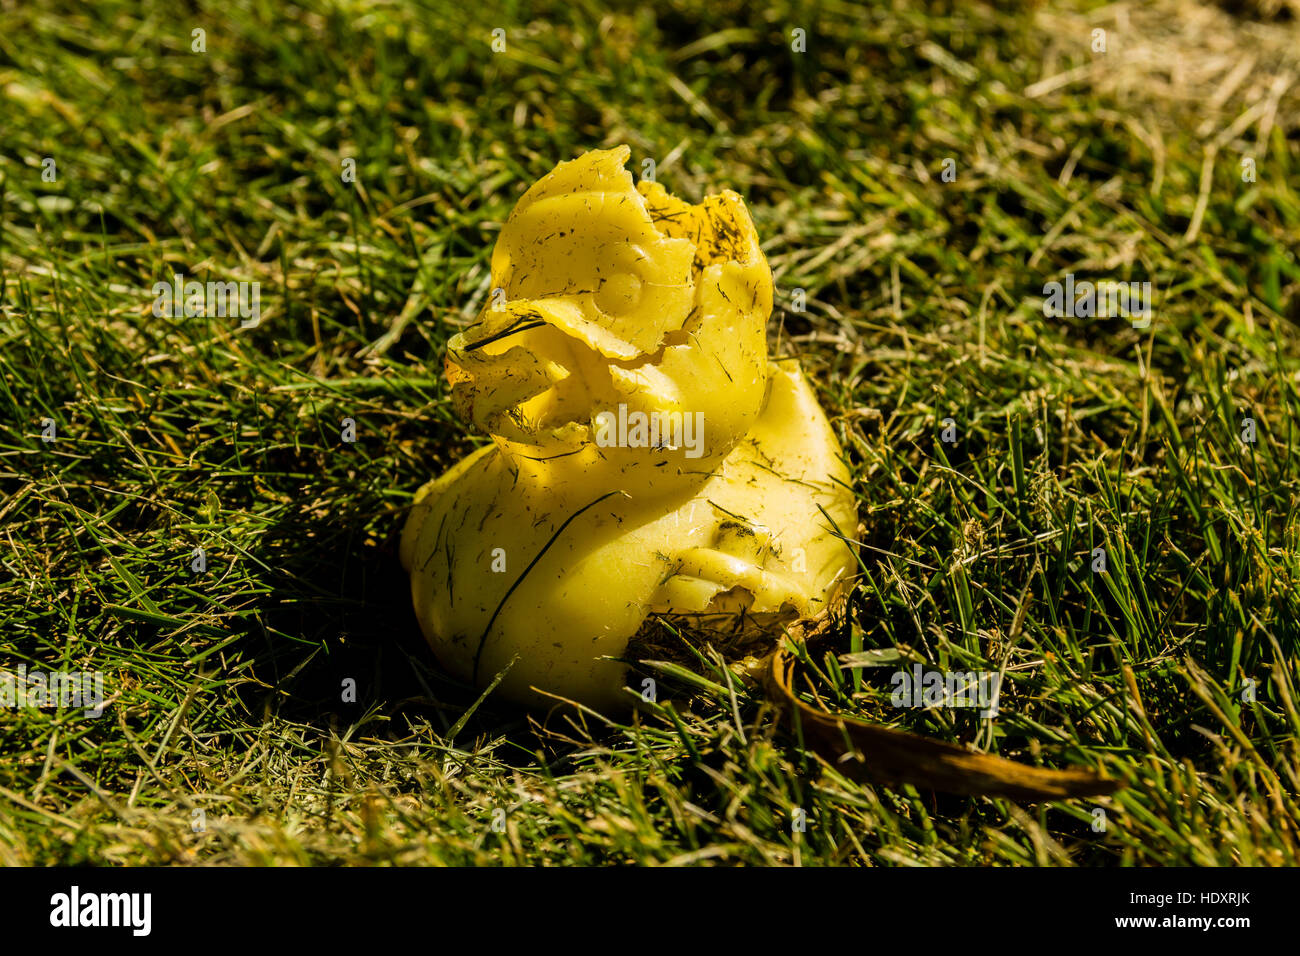 A rubber duck involved in a lawn mower traffic accident Stock Photo